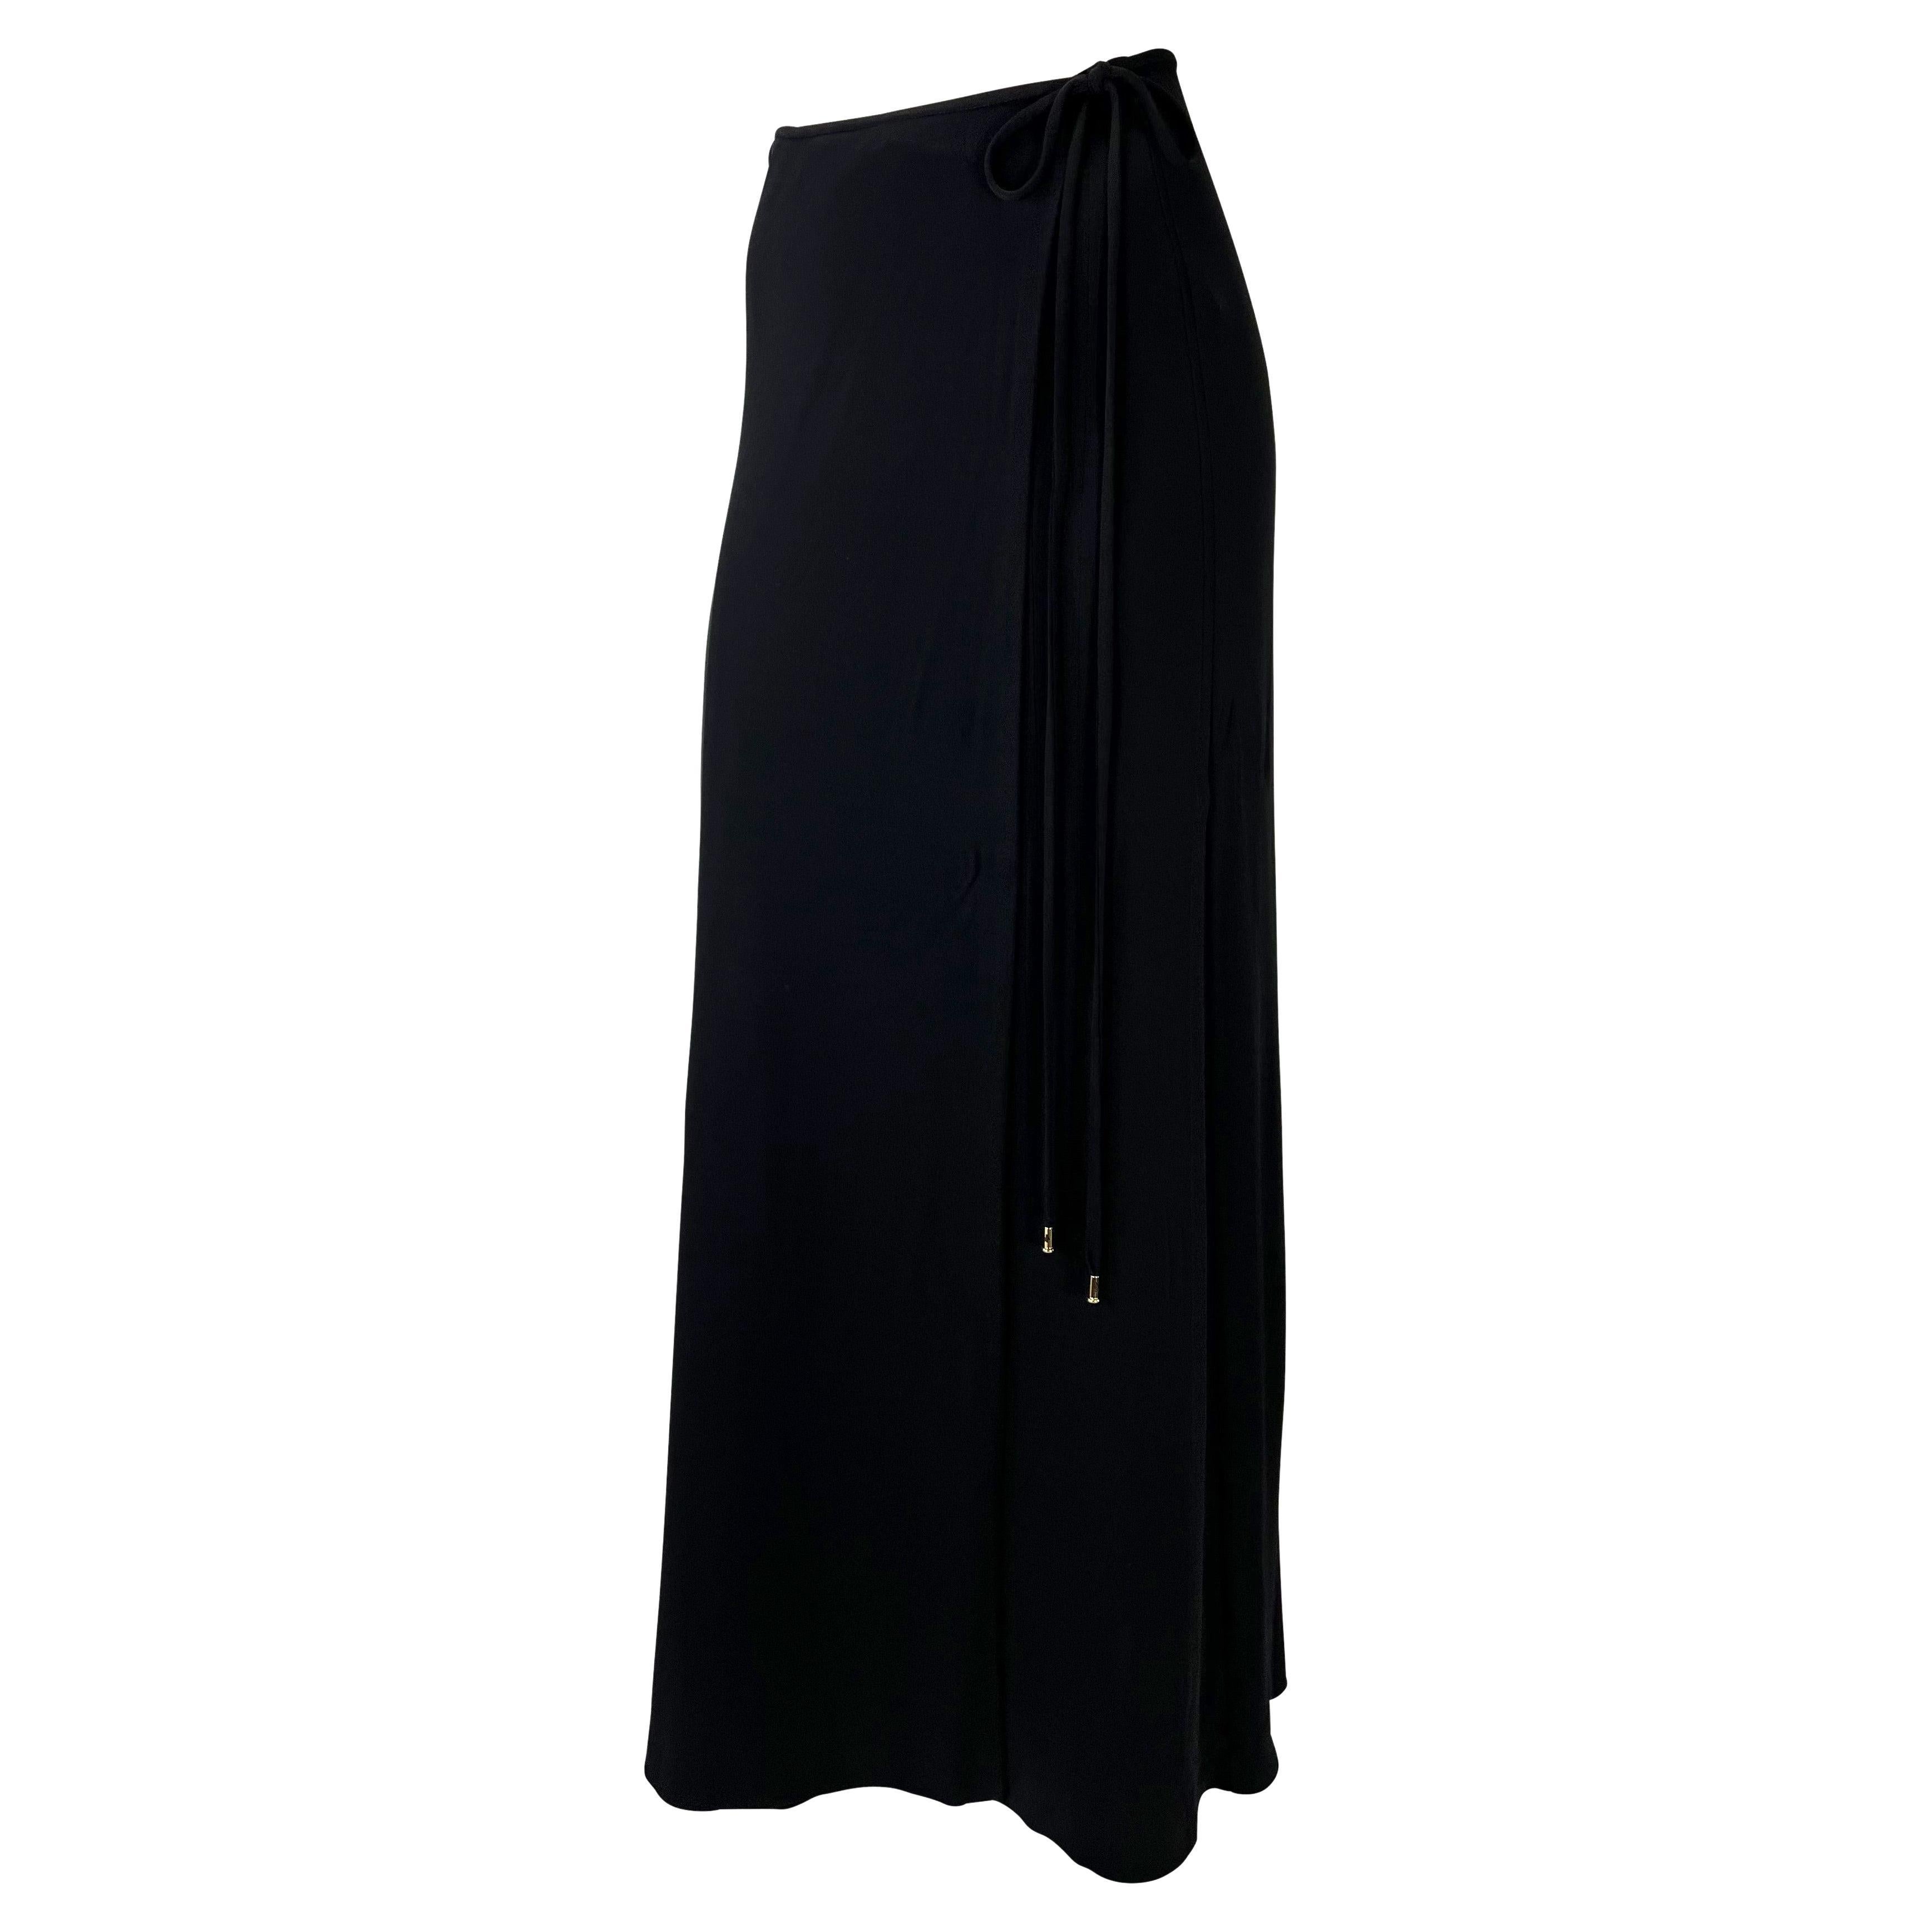 S/S 1997 Gucci by Tom Ford Black Wrap Maxi G Logo Stretch Viscose Skirt For Sale